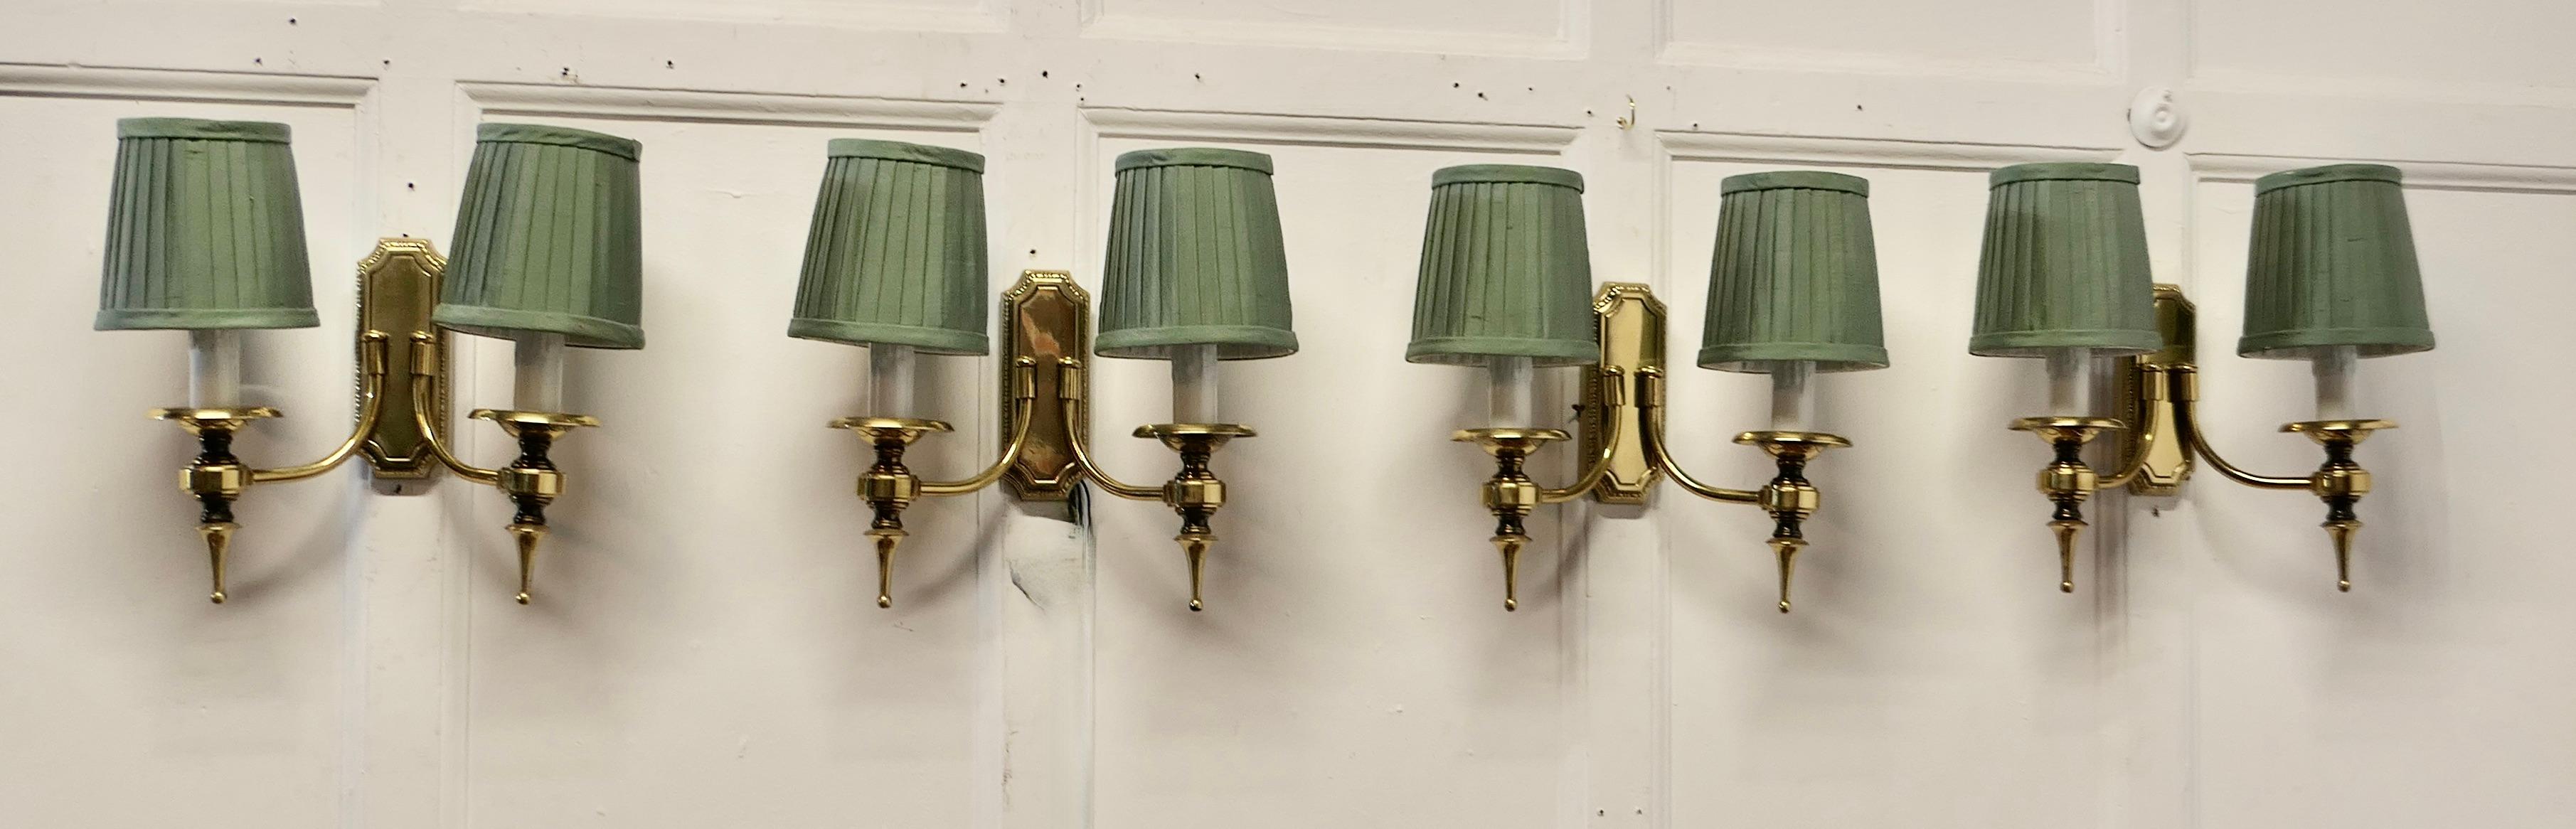 A Set of 4 Twin Wall Lights  A very handsome set of 4 double wall lights  For Sale 3